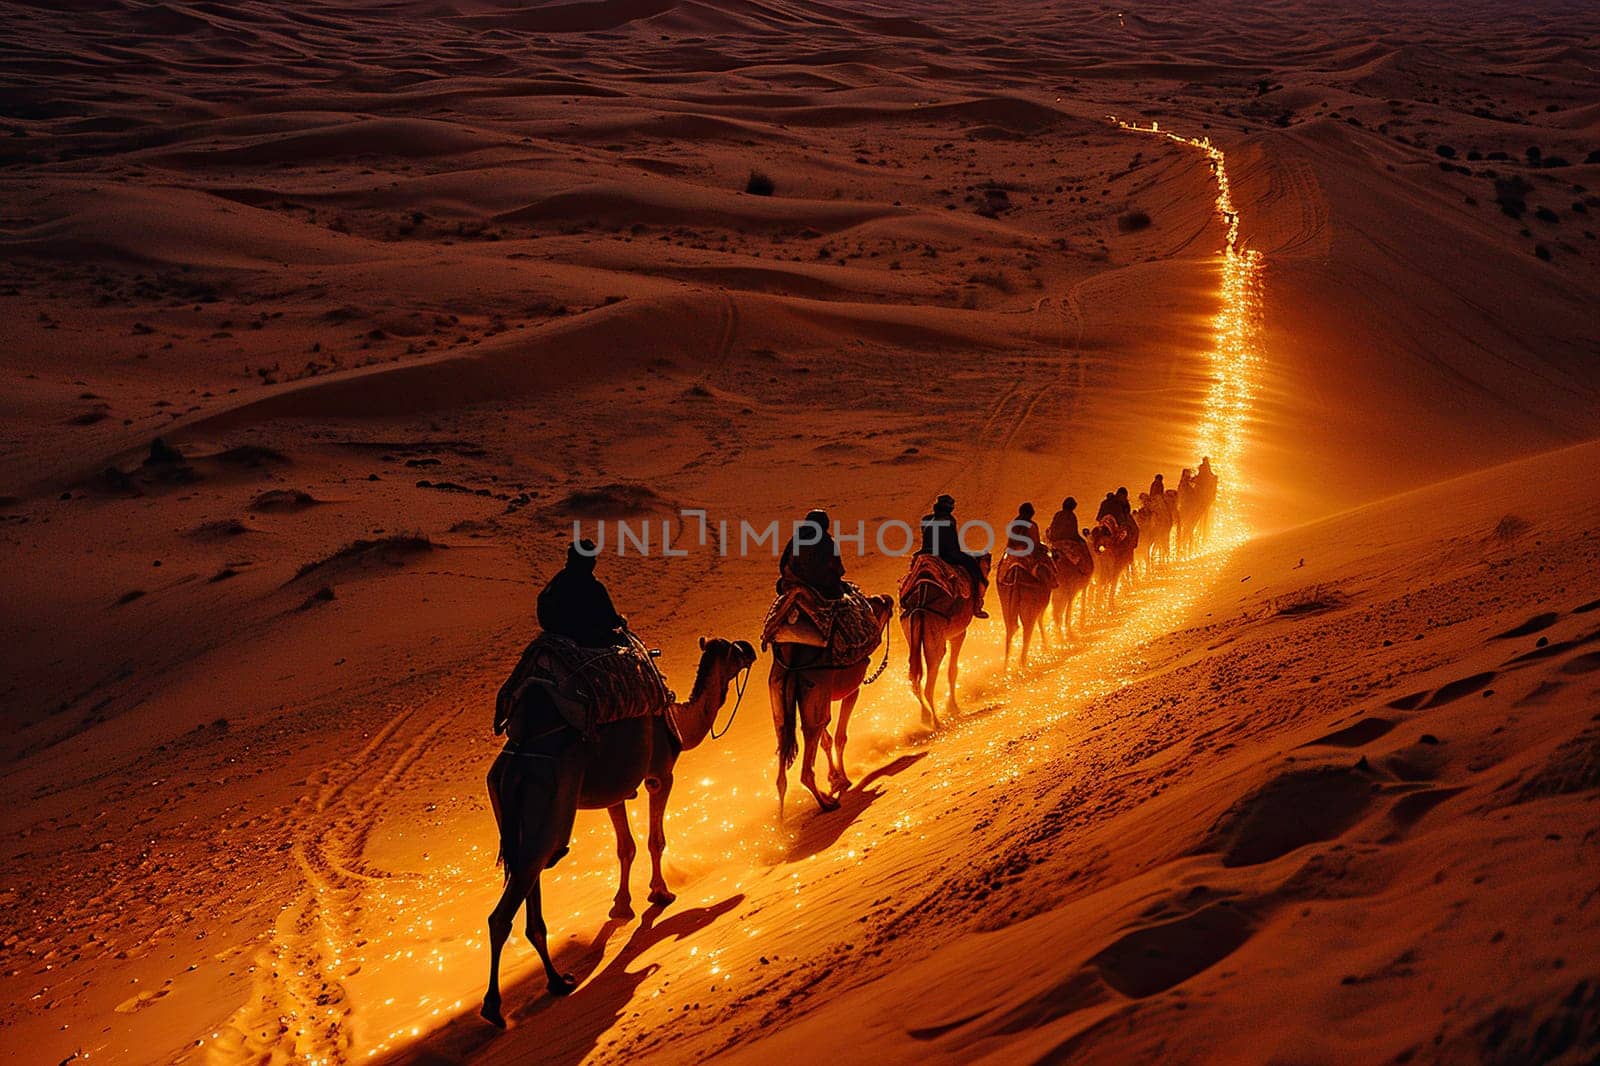 Top view of a camel caravan in the desert at night. Generated by artificial intelligence by Vovmar